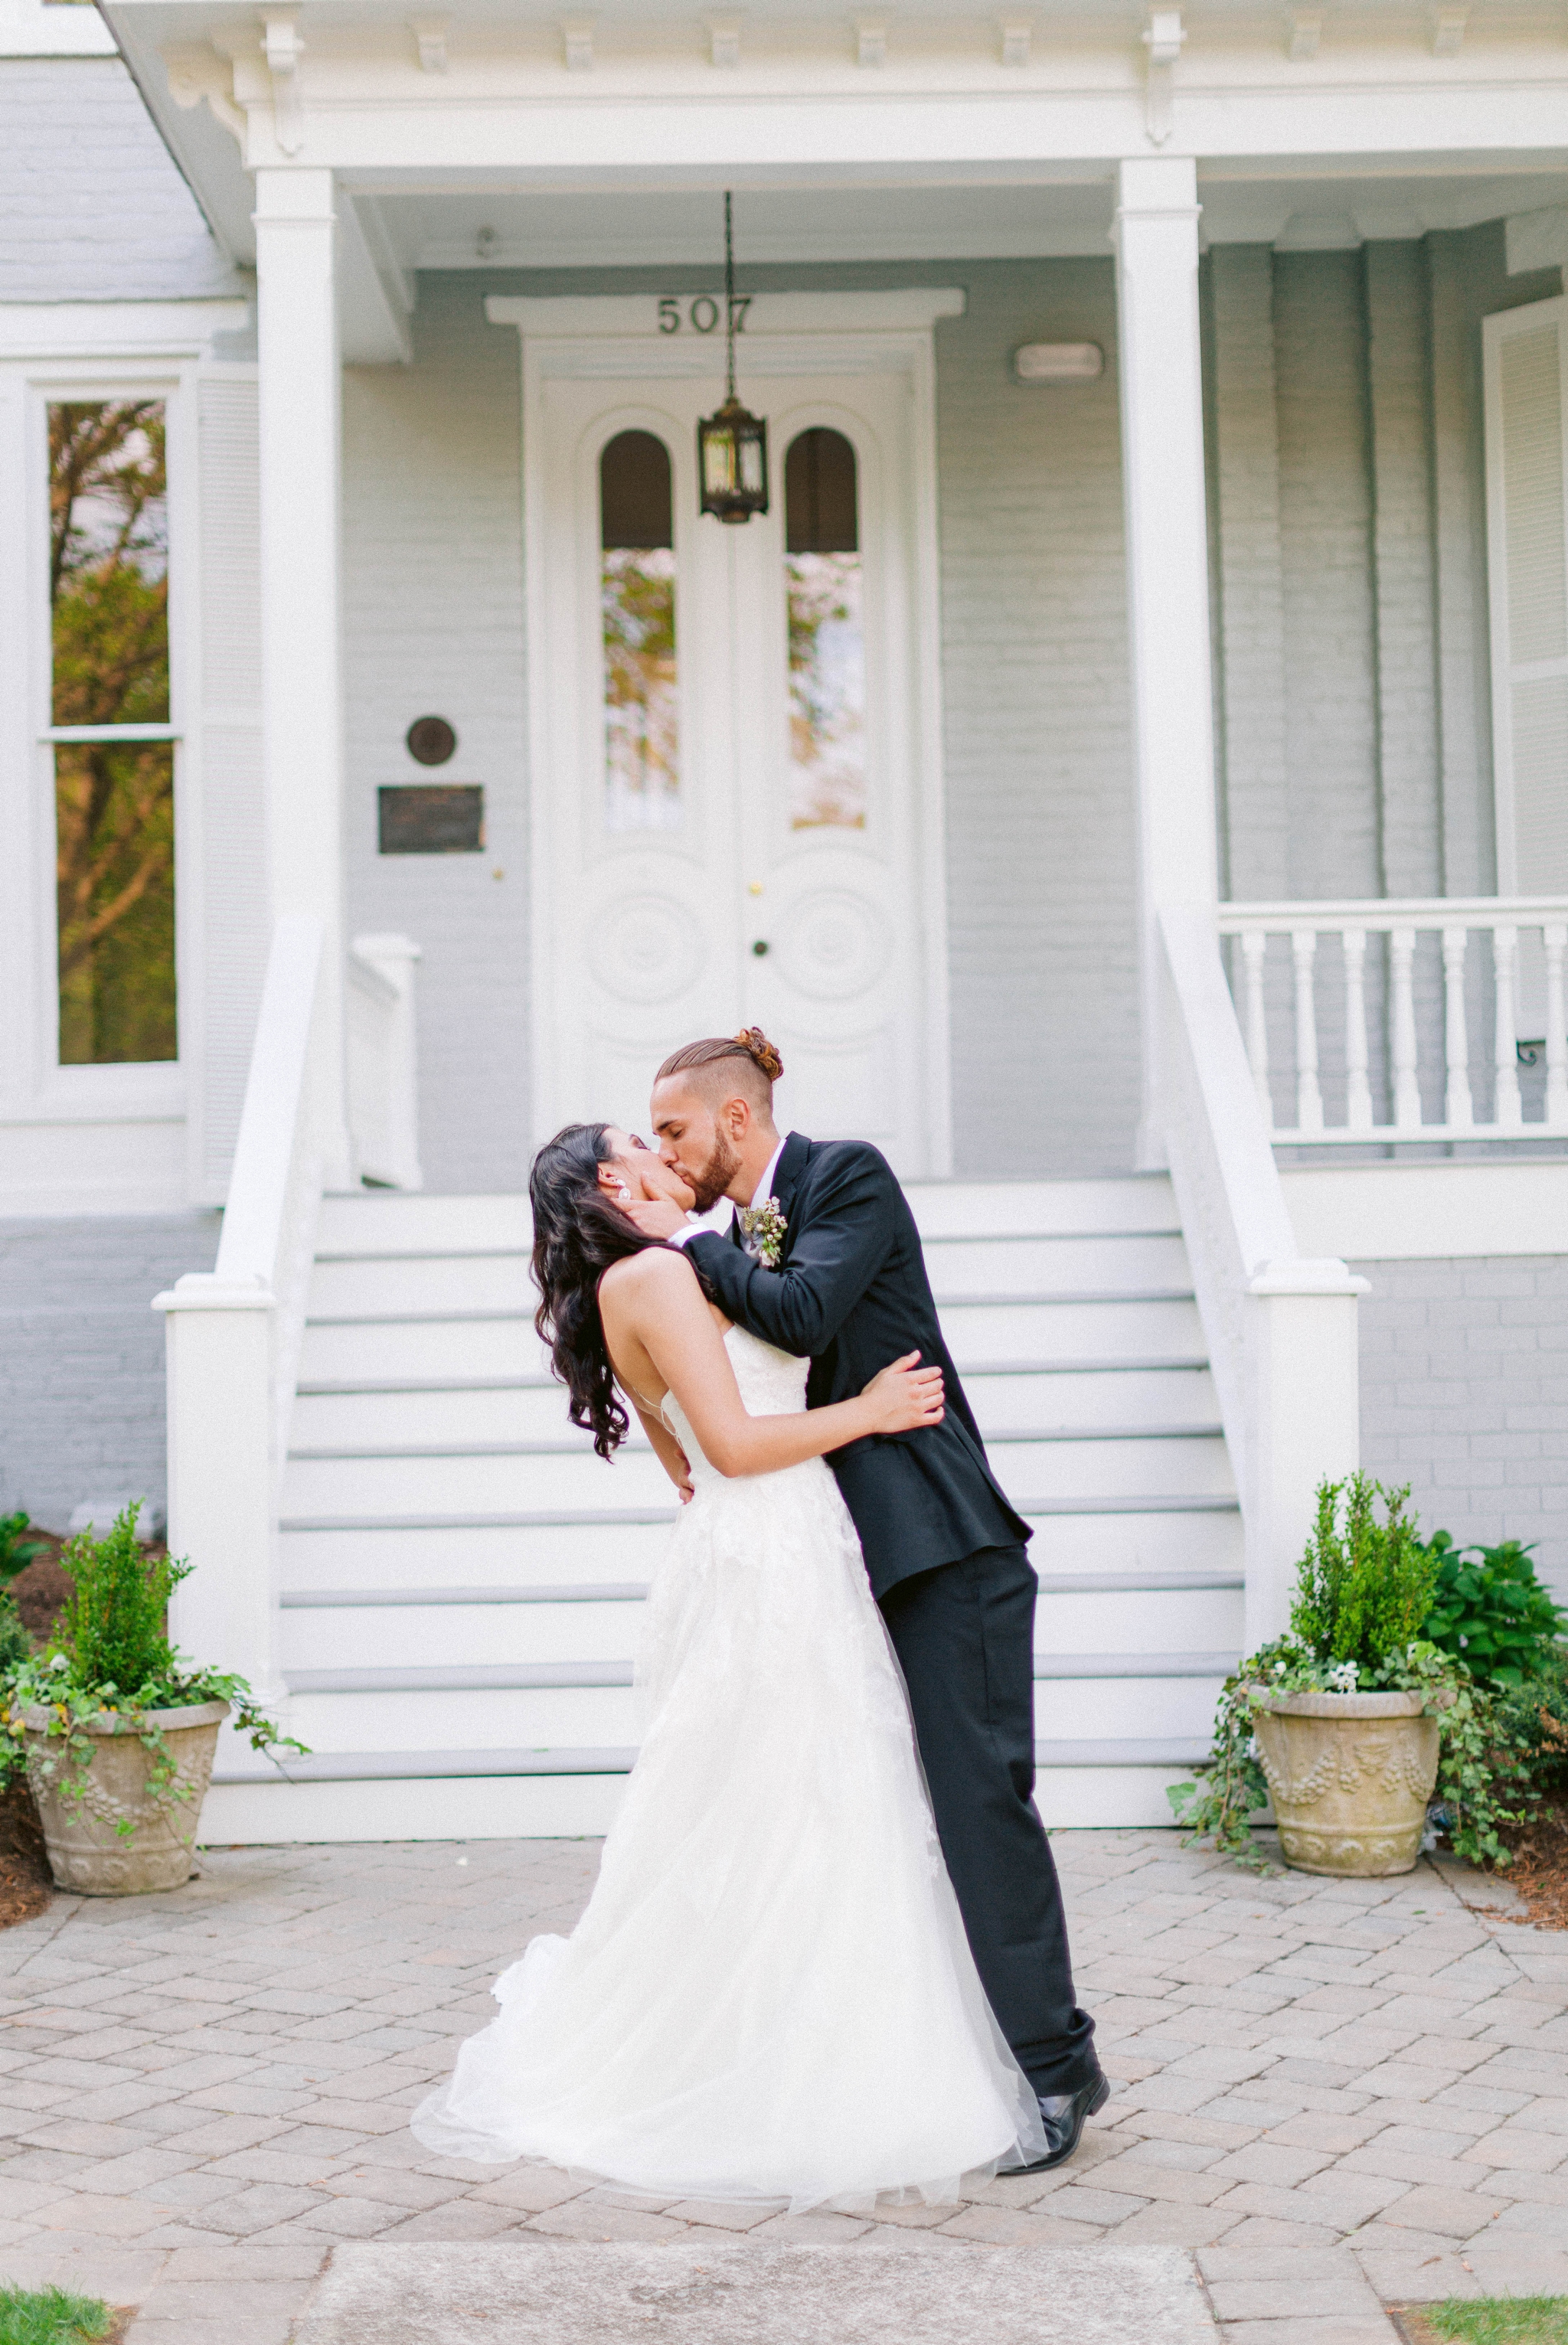  Bride kissing Groom in front of the mansion - Wedding Portraits on the front porch of an all white luxury estate - Bride is wearing a Aline Ballgown by Cherish by Southern Bride with a long cathedral veil - Groom is wearing a black suit by Generatio